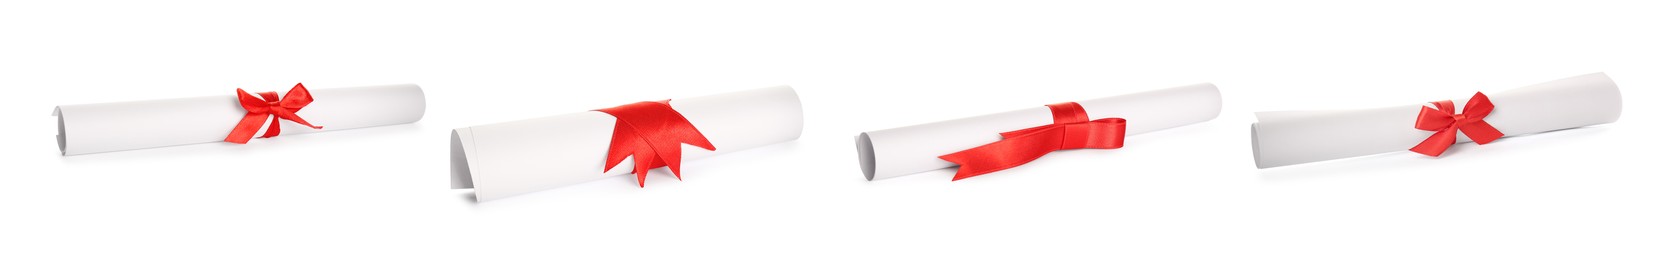 Image of Rolled student's diplomas with red ribbons on white background, collage. Banner design